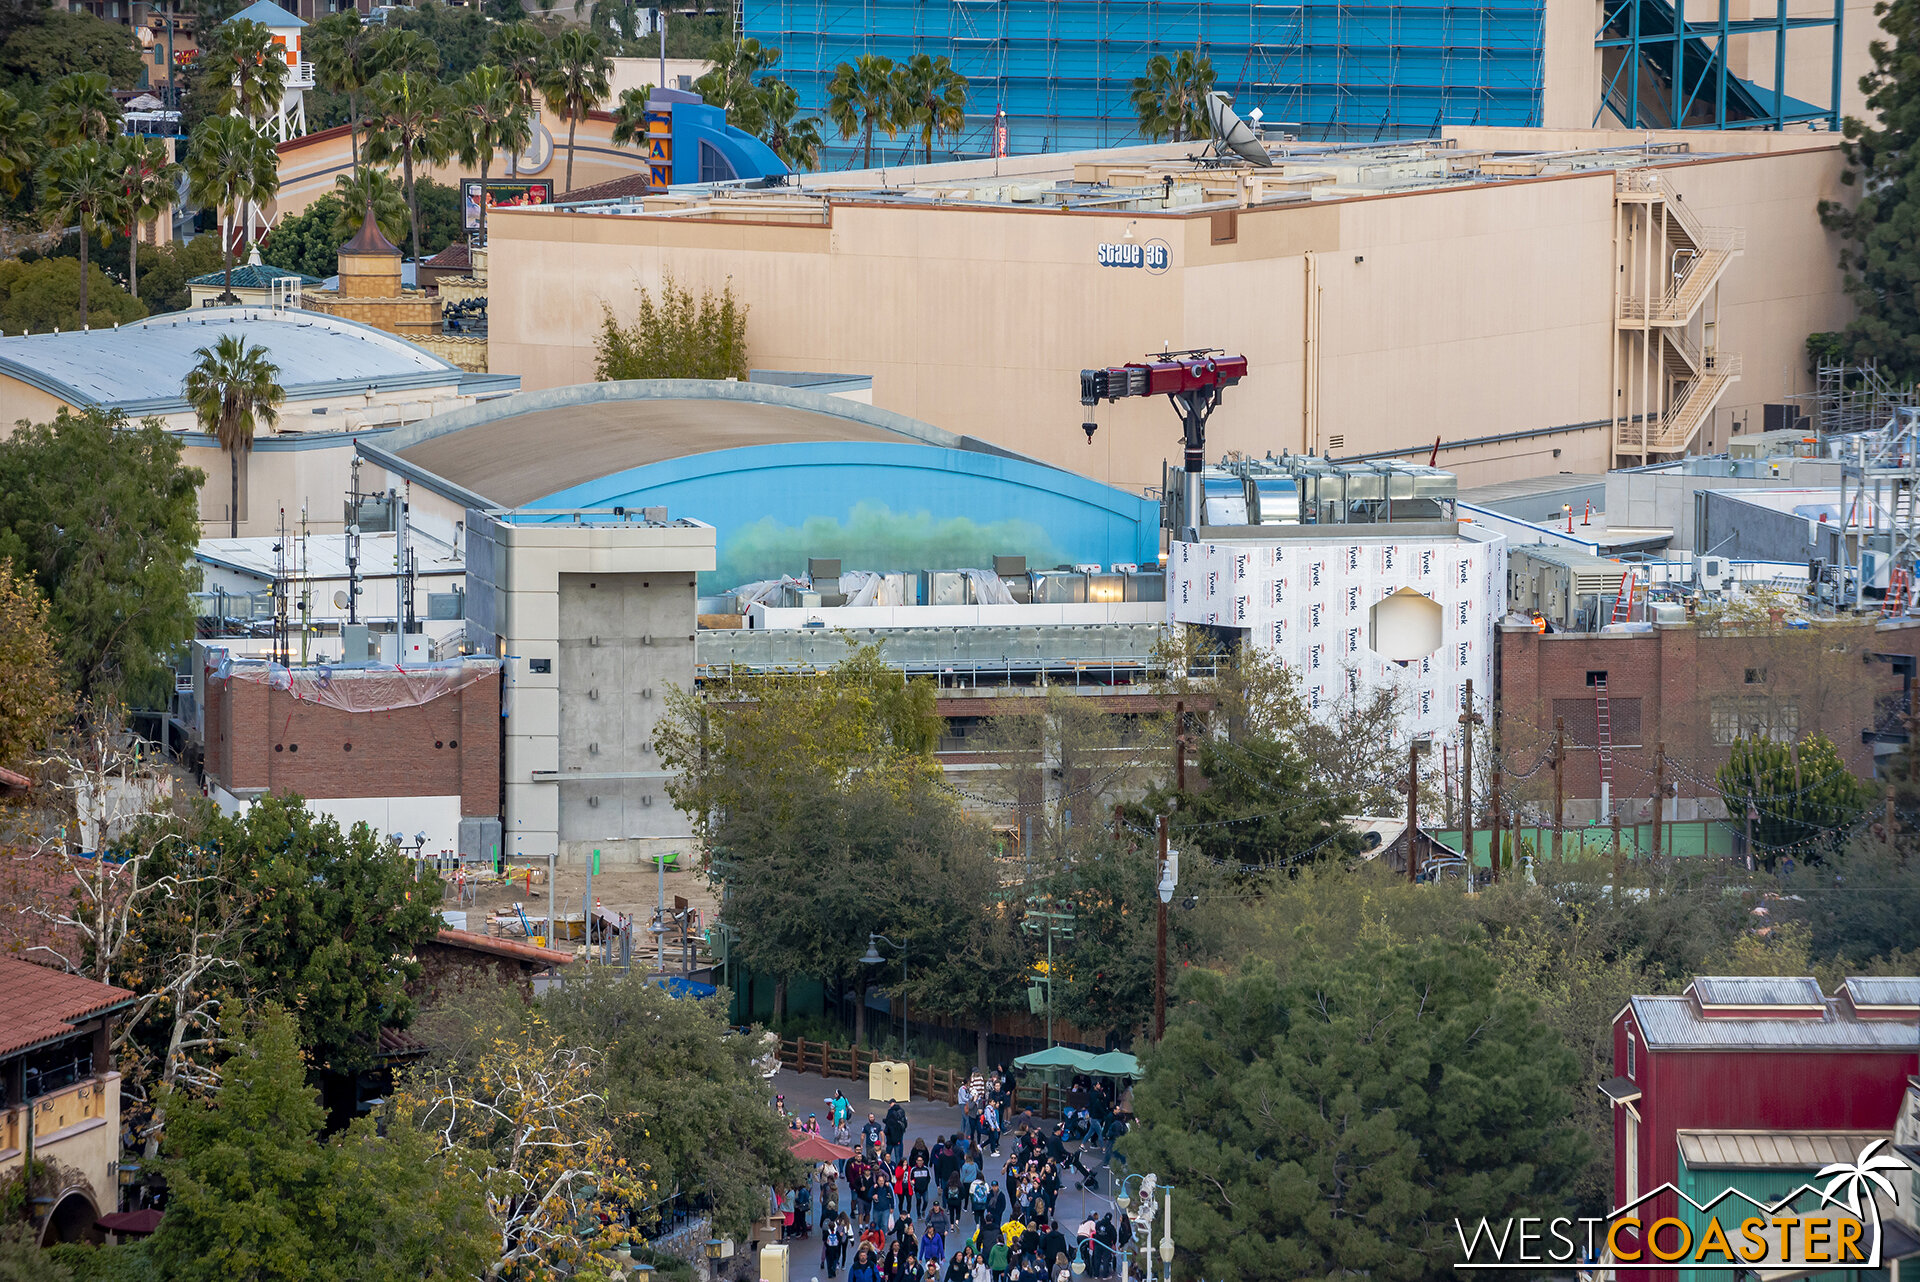  The Spider-Man buidling from above.  They still need to repaint the main show building so that it’s less “Tough to Be A Bug” ish. 